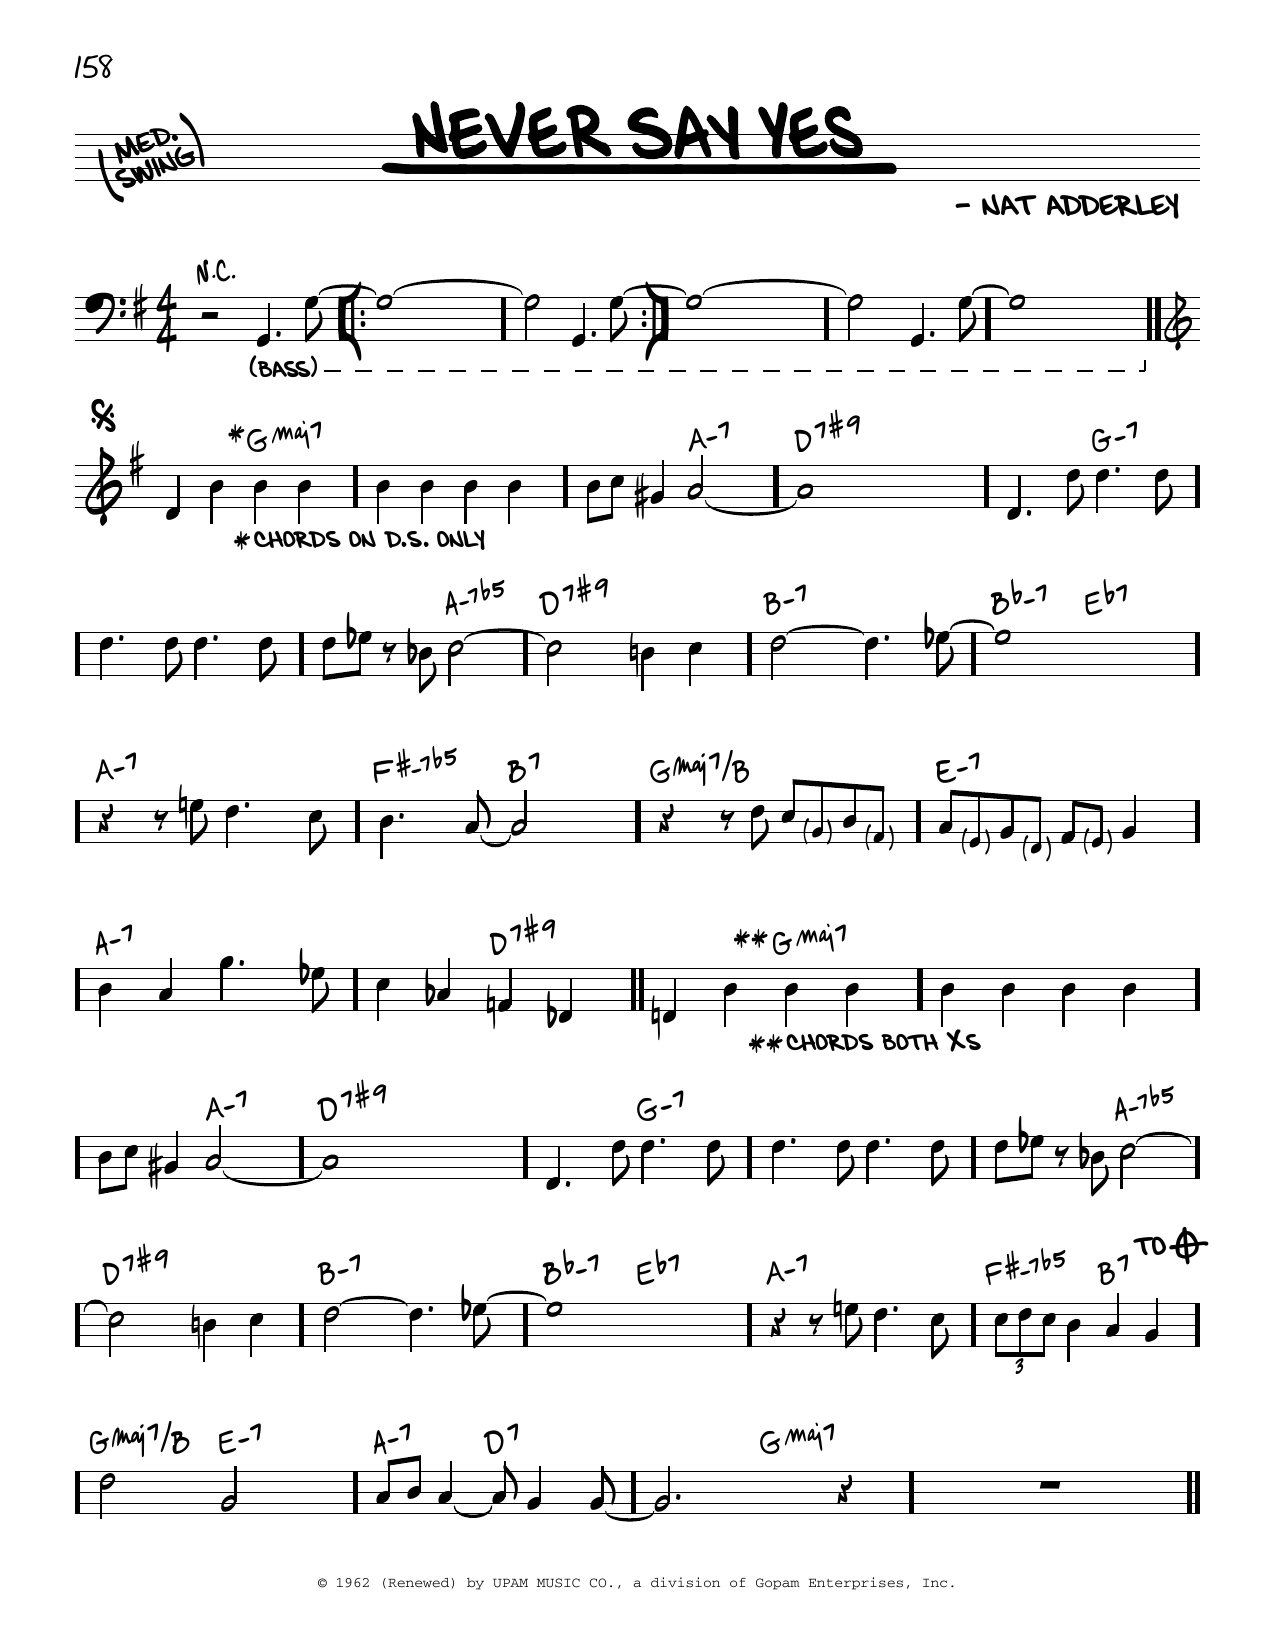 Download Nancy Wilson & Cannonball Adderley Never Say Yes Sheet Music